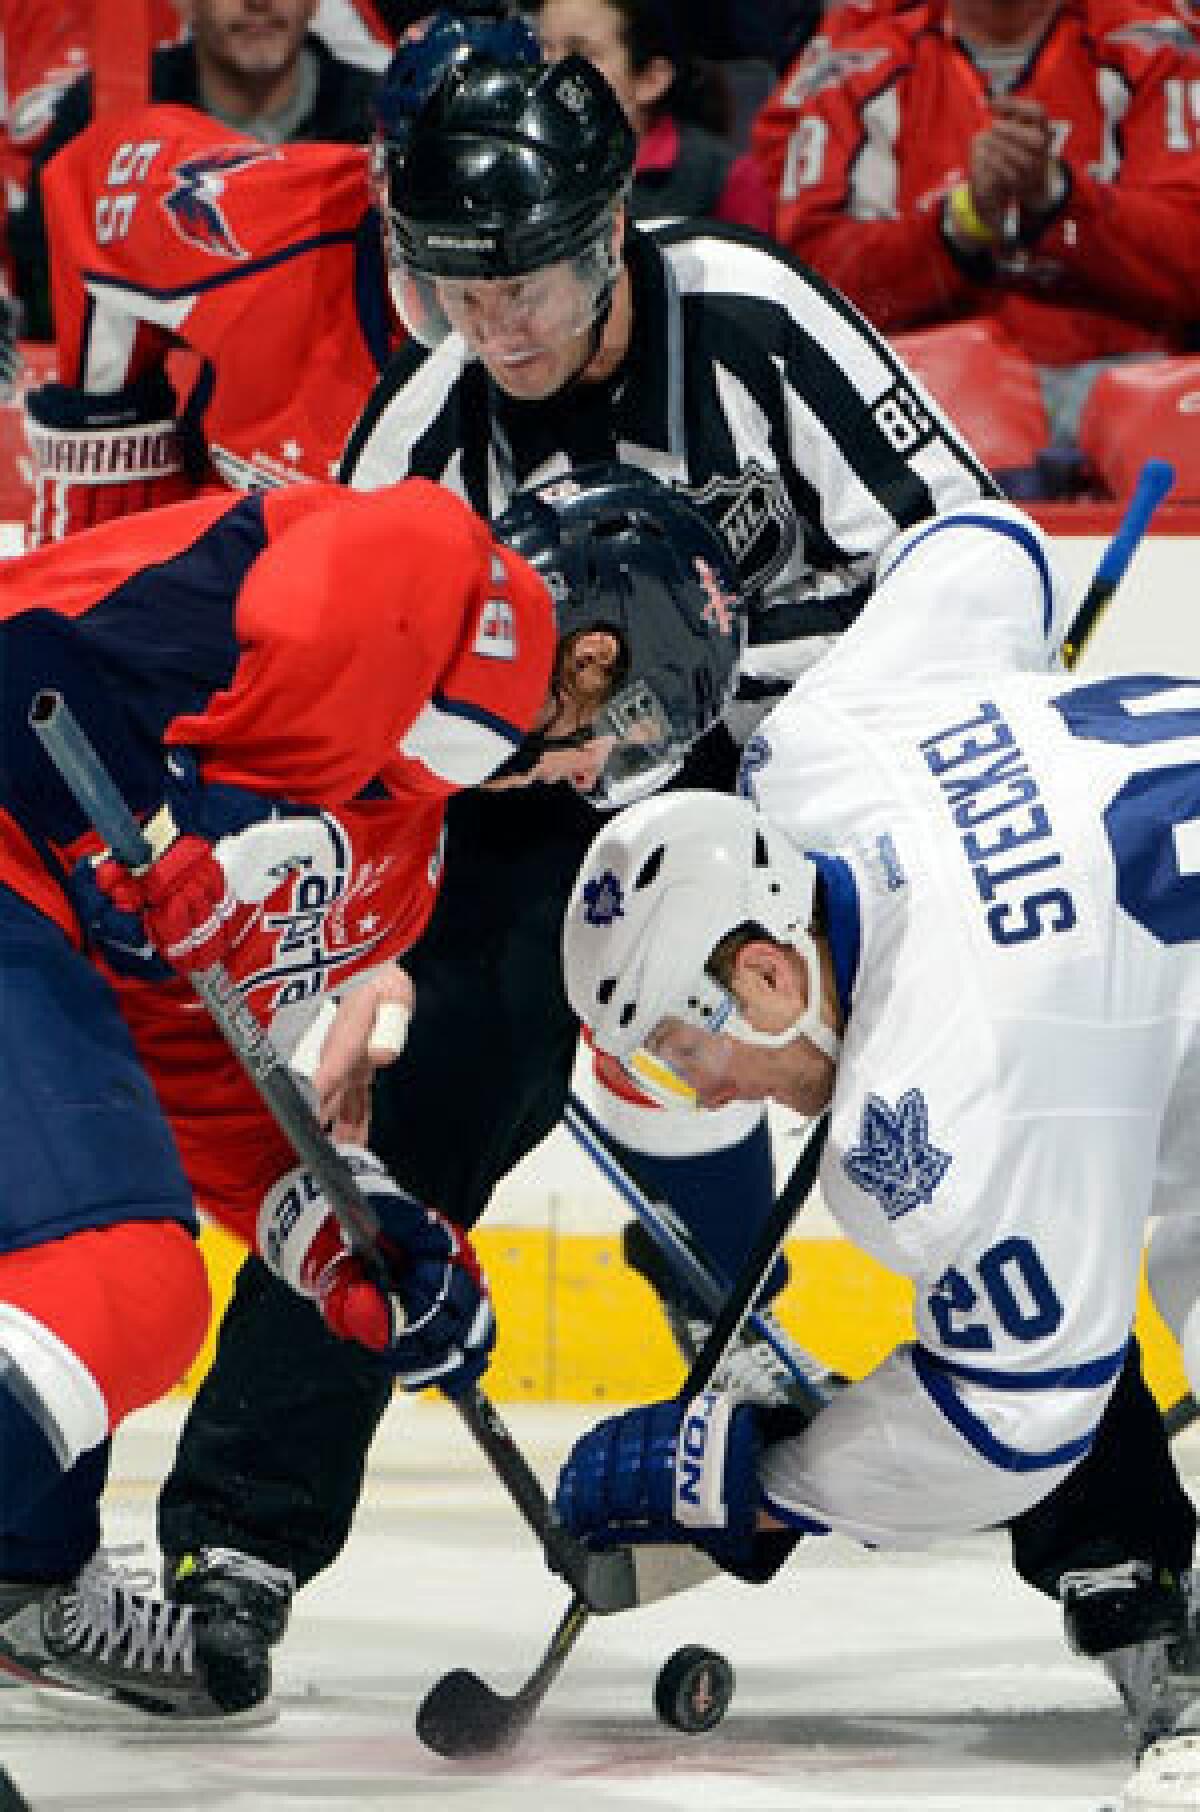 Nicklas Backstrom of the Washington Capitals takes a face-off against David Steckel of the Toronto Maple Leafs.